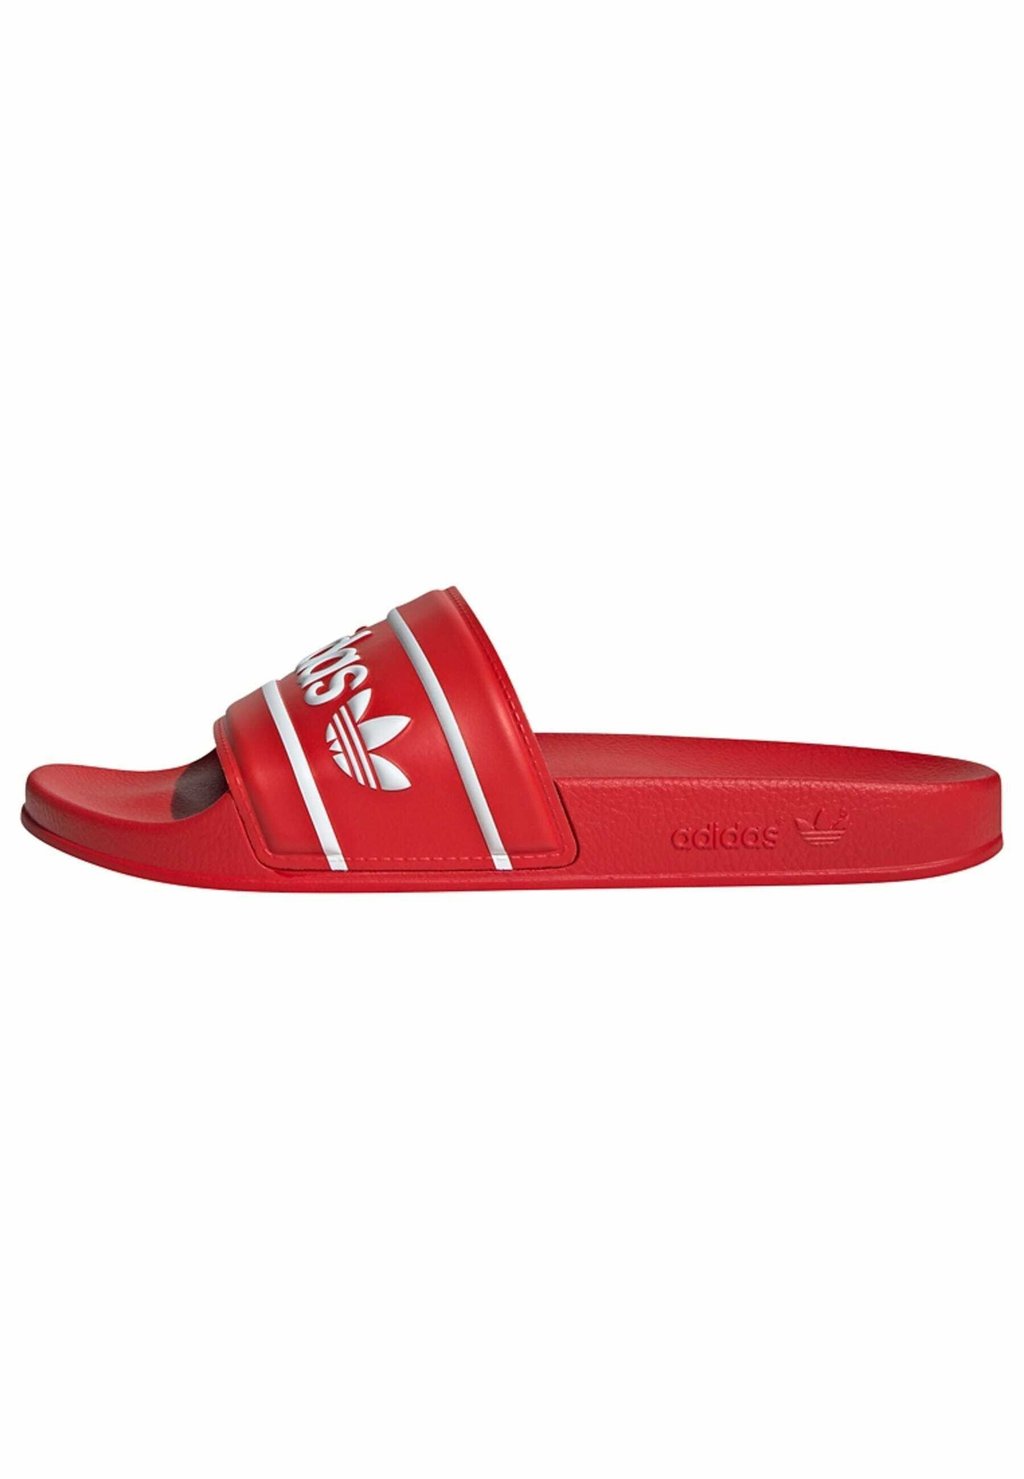 Шлепанцы adidas Originals, цвет red red cloud white fitsch red white